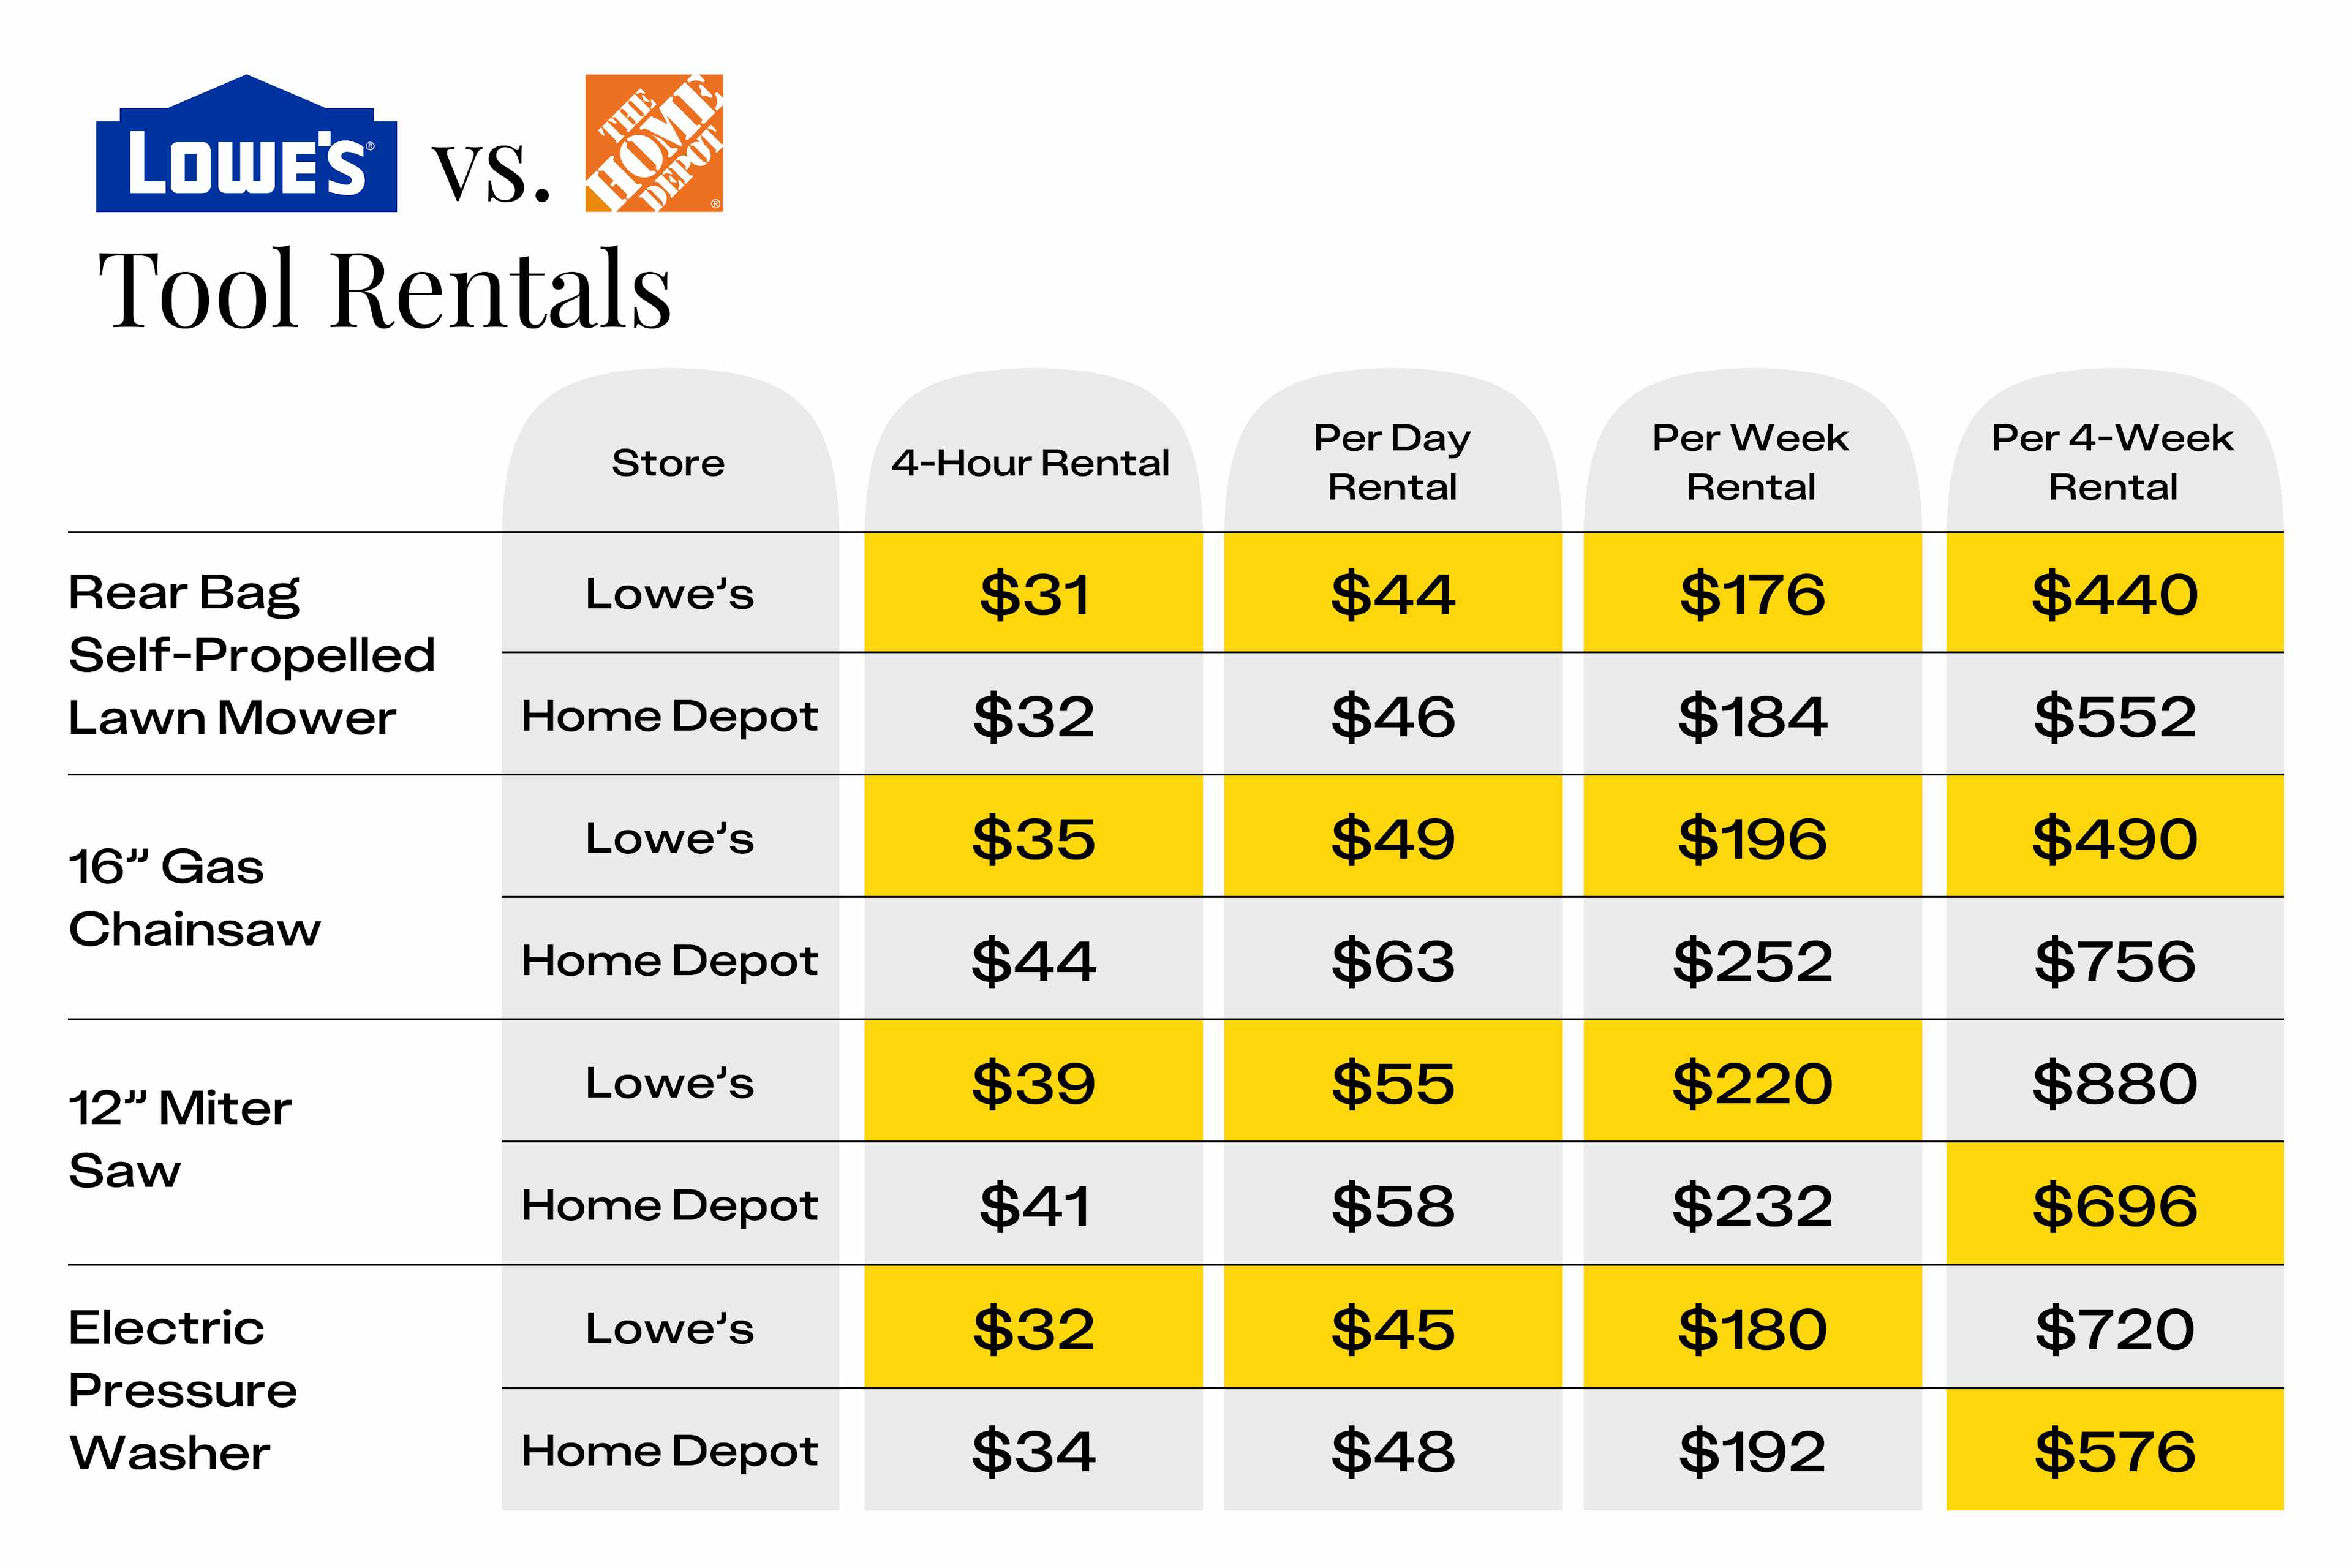 Lowe's tool rental prices compared to Home Depot's for lawn mowers, chainsaws, miter saws, and electric pressure washers